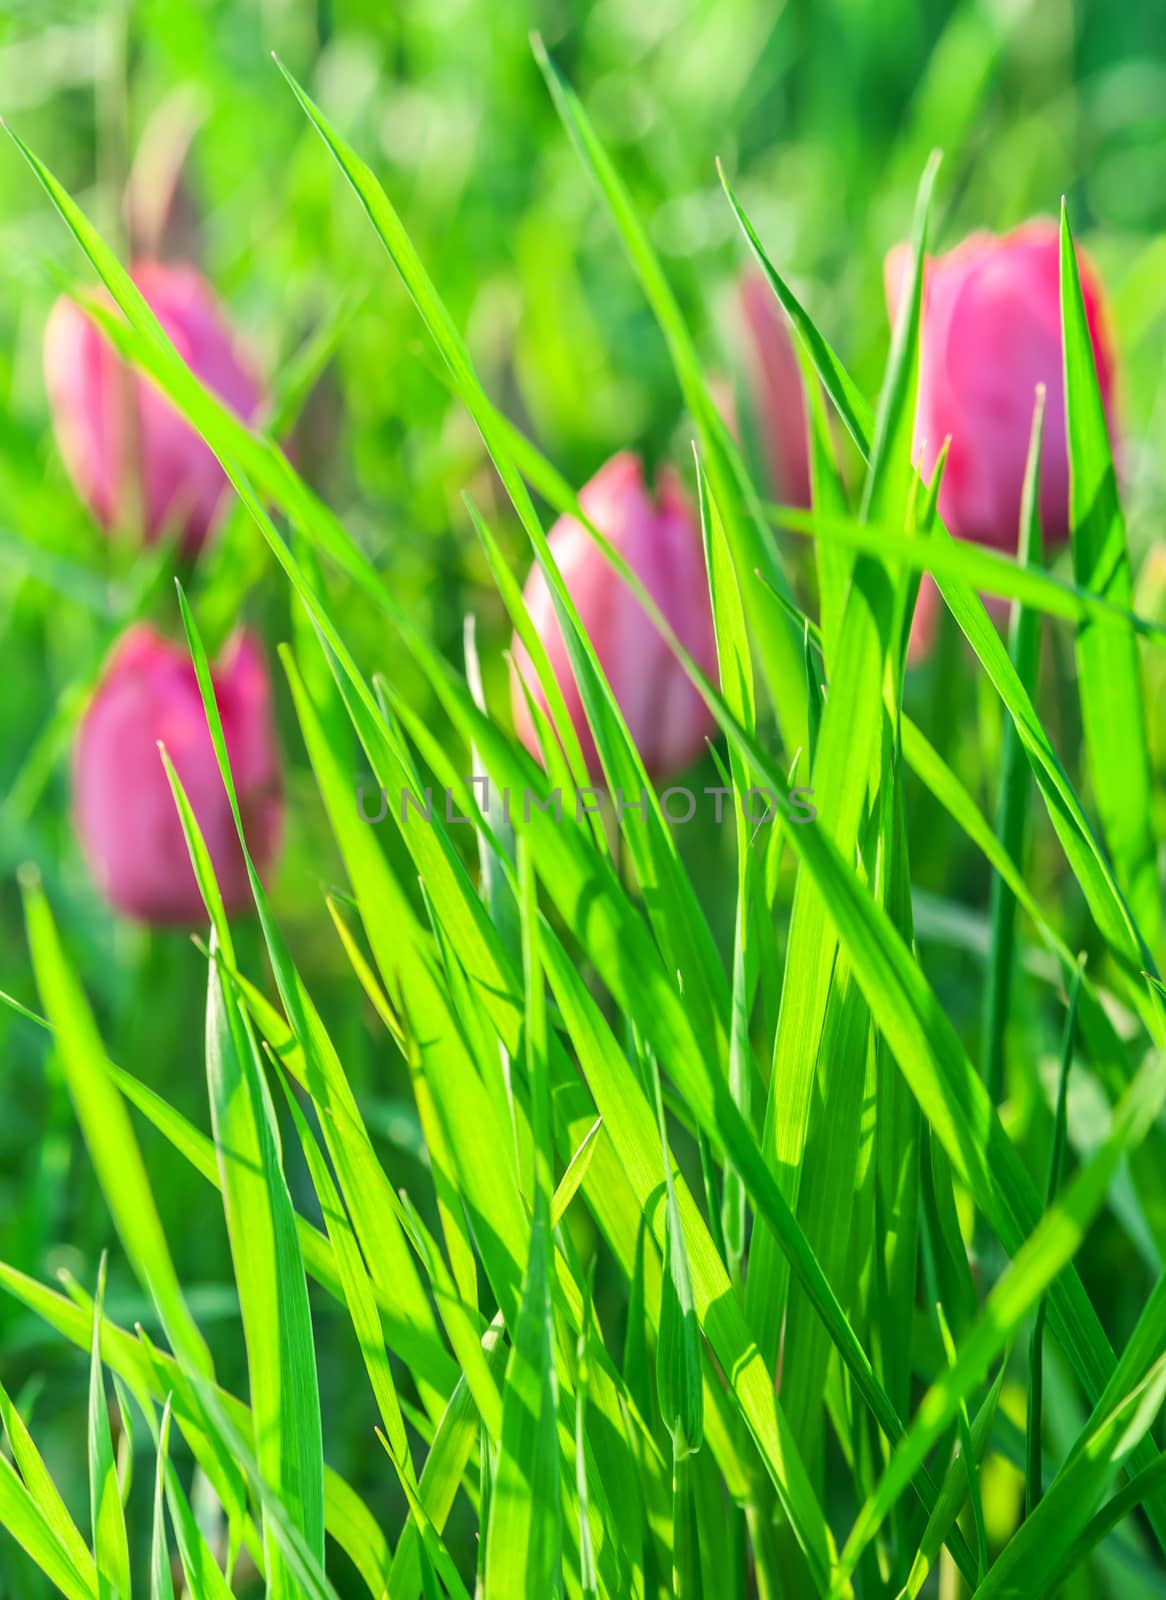 Green grass on a background of pink tulips by zeffss